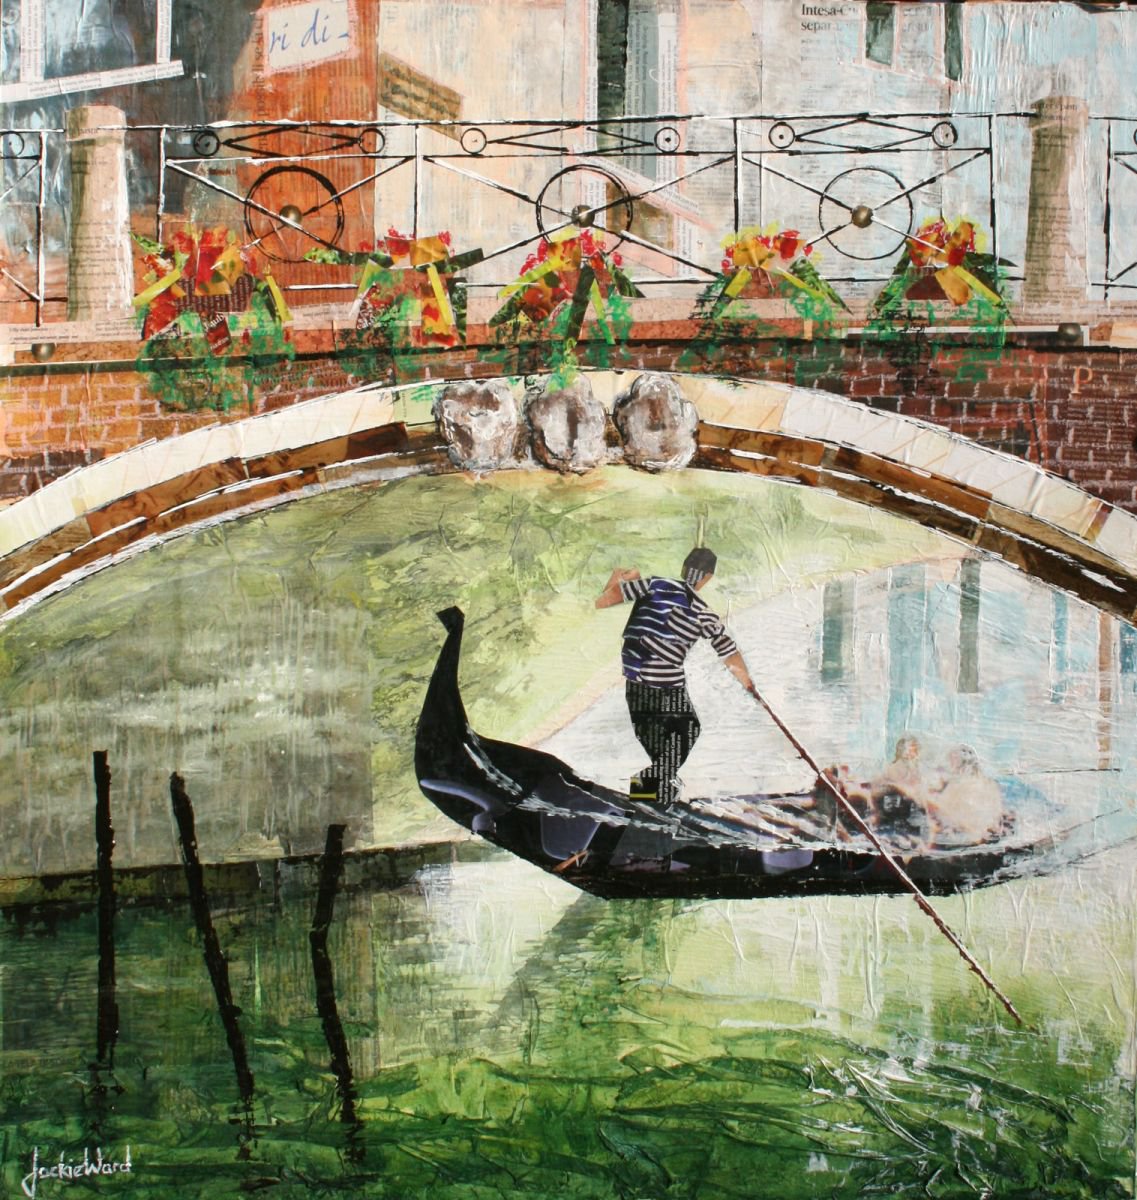 The Gondolier by Jackie Ward